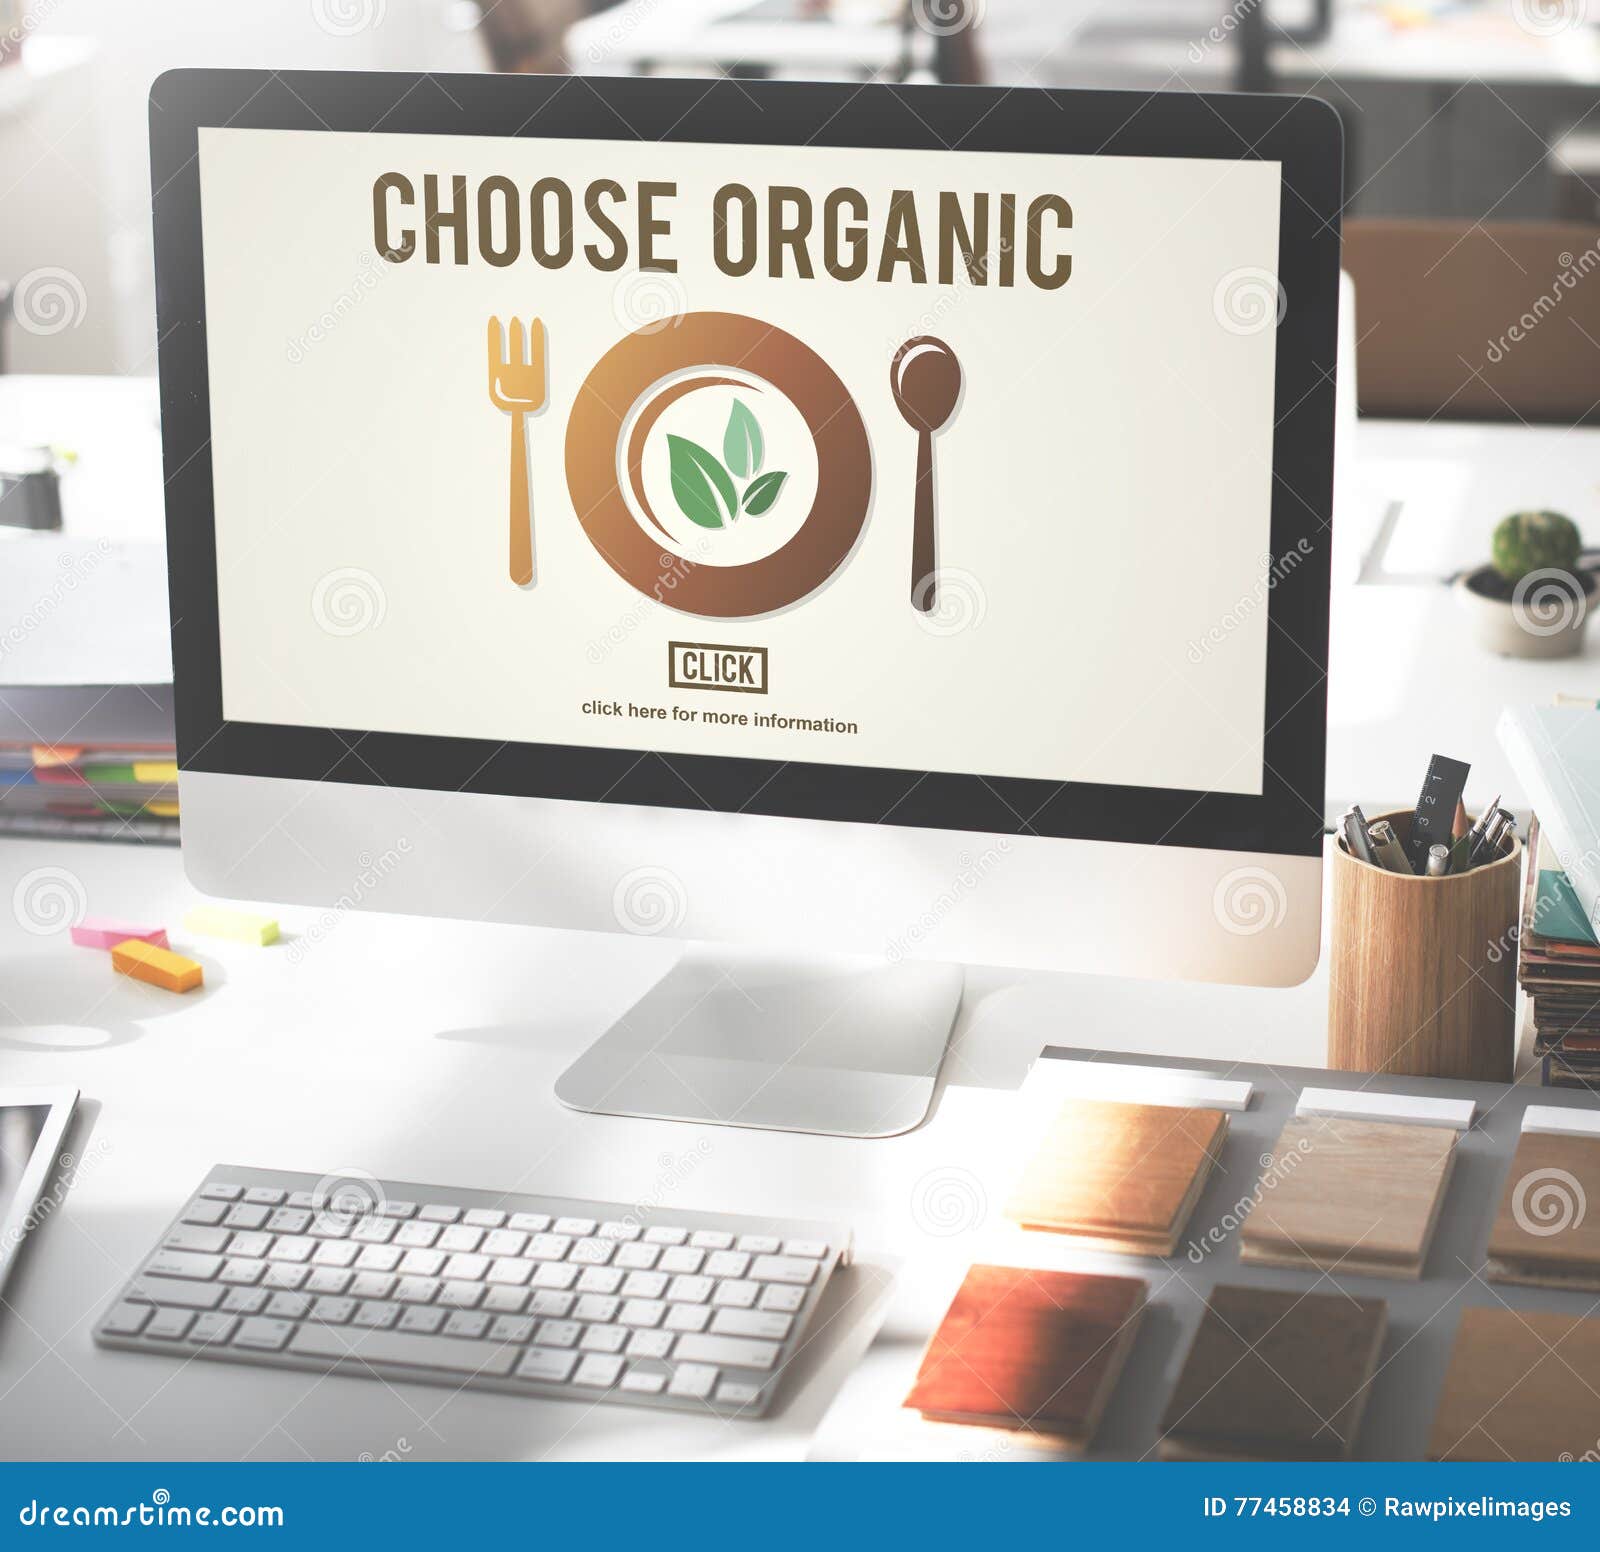 choose organic healthy eating food lifestyles concept